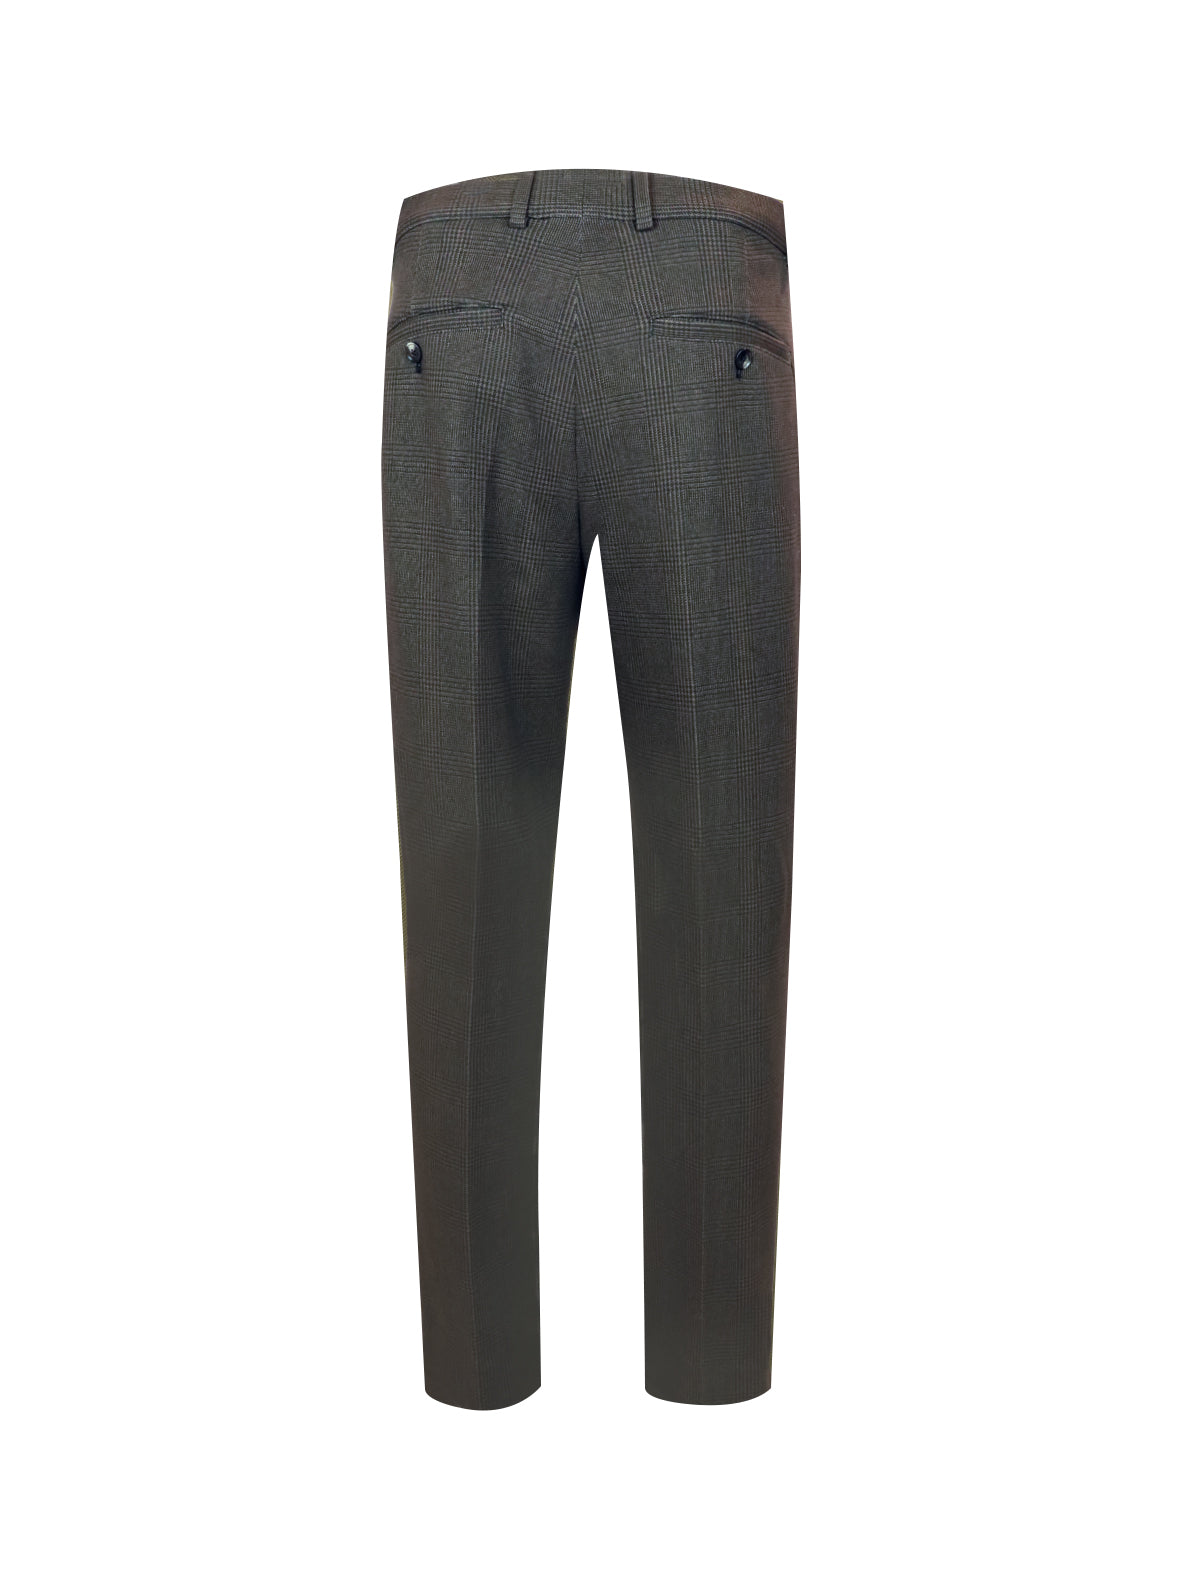 CIRCOLO 1901 Tailored Pants in Tabac